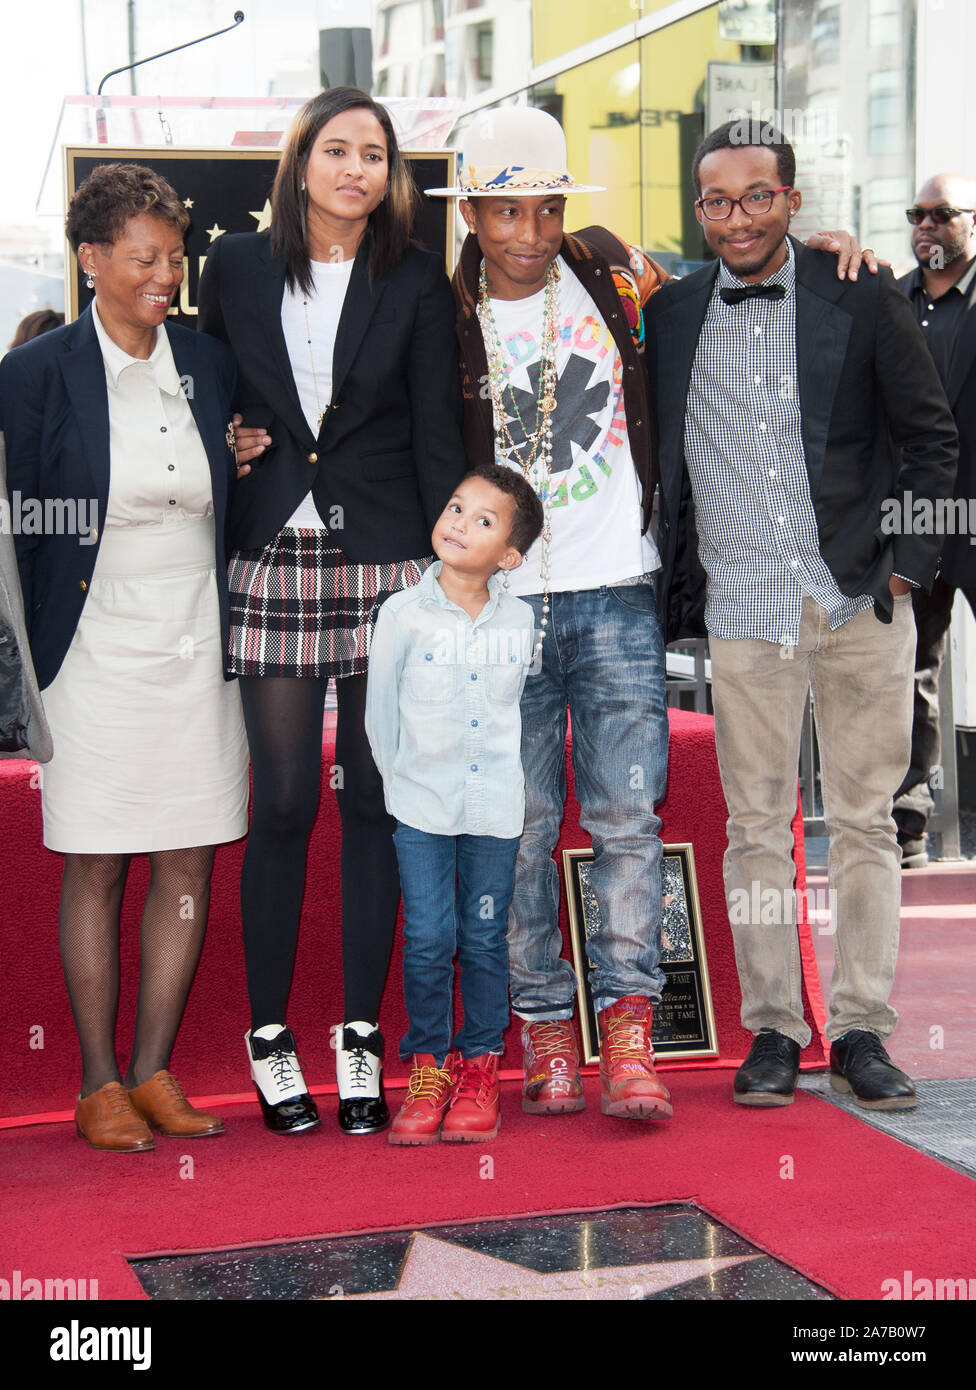 LOS ANGELES, CA - DECEMBER 4, 2014: Singer/songwriter Pharrell Williams  with wife & son & family on Hollywood Boulevard where he was honored with  the 2,537th star on the Hollywood Walk of